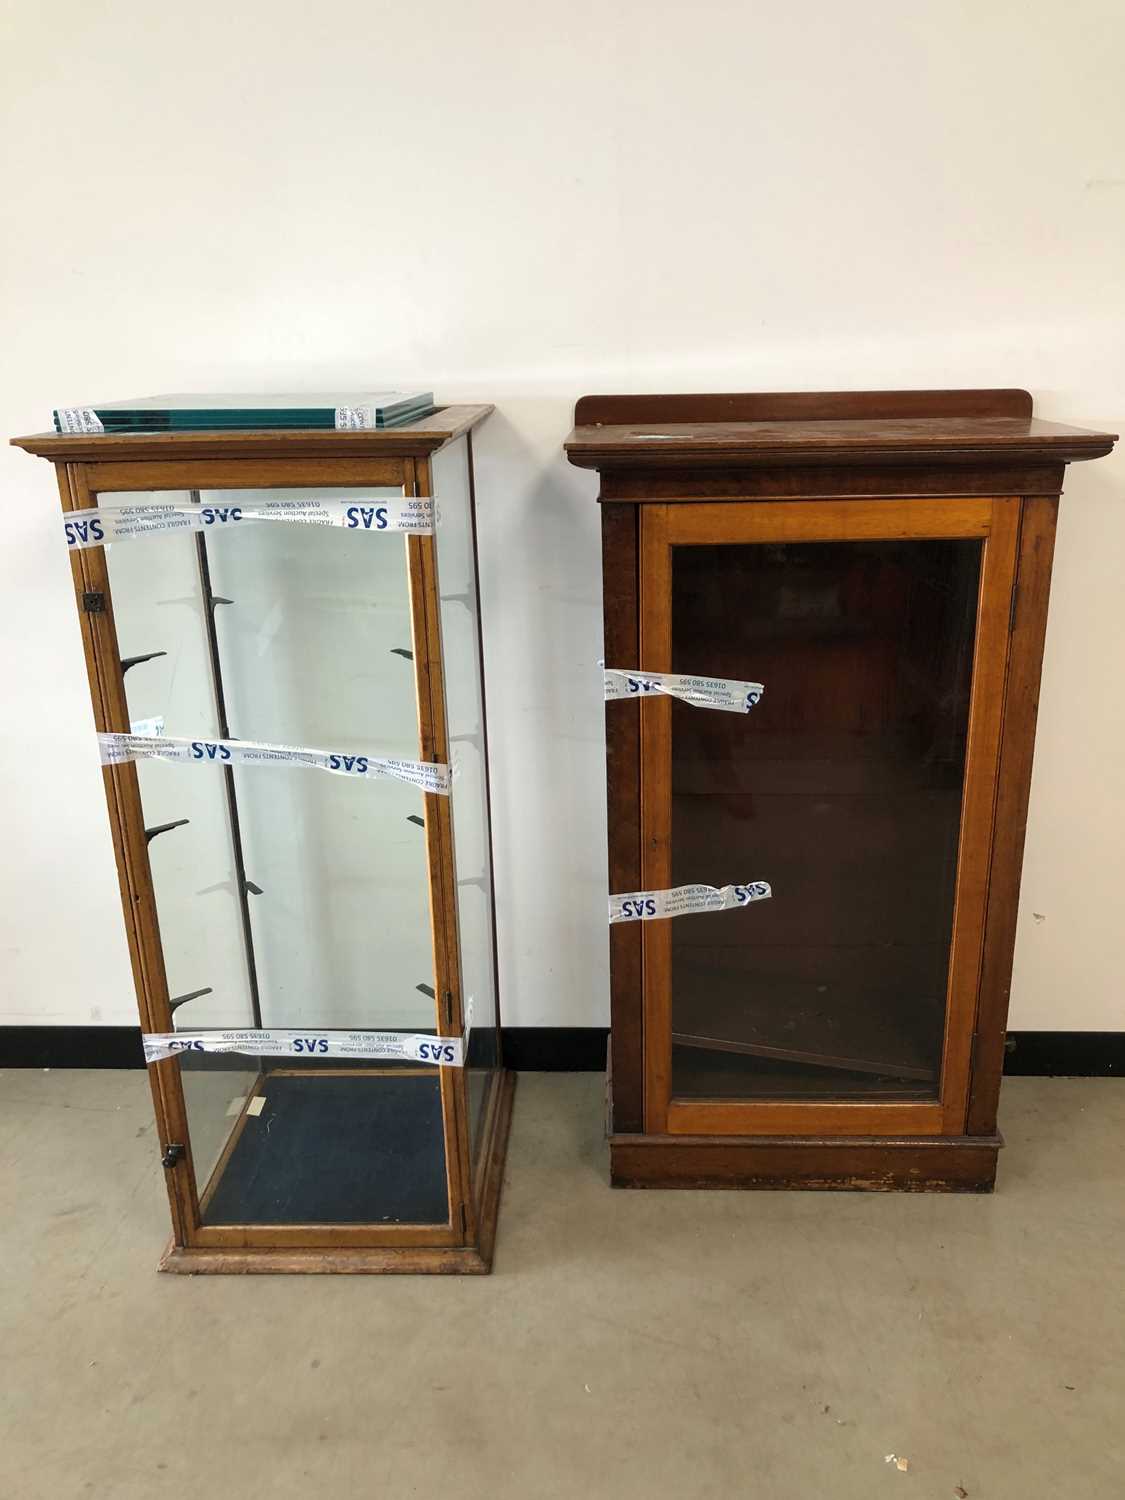 Lot 88 - A pair of early 20th century display cases